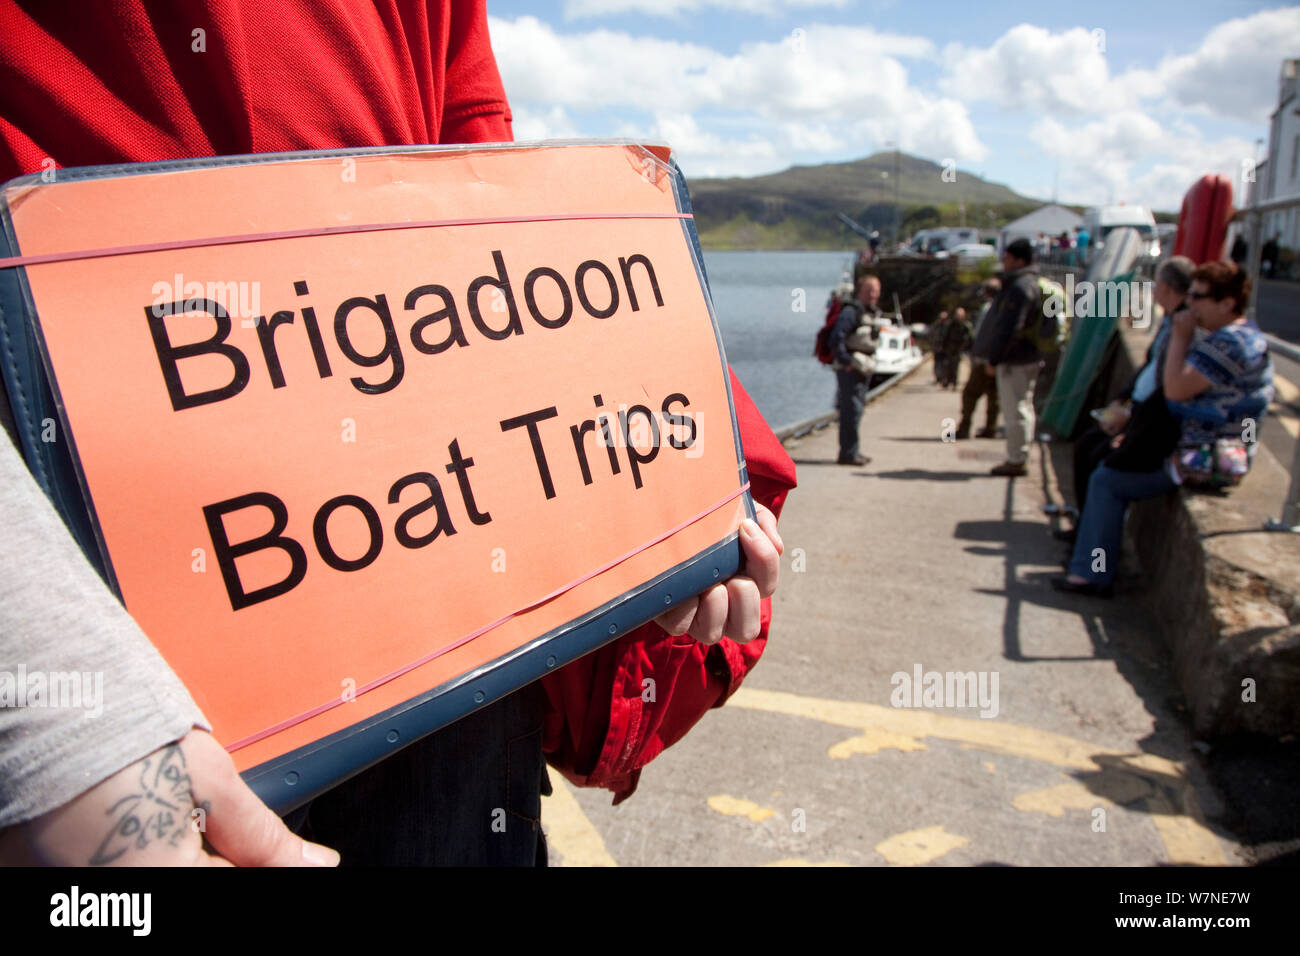 Tourist signs promoting boat trips based around the presence of White tailed sea eagles, Portree, Skye, Inner Hebrides, Scotland, UK, June 2011. 2020VISION Book Plate. Stock Photo